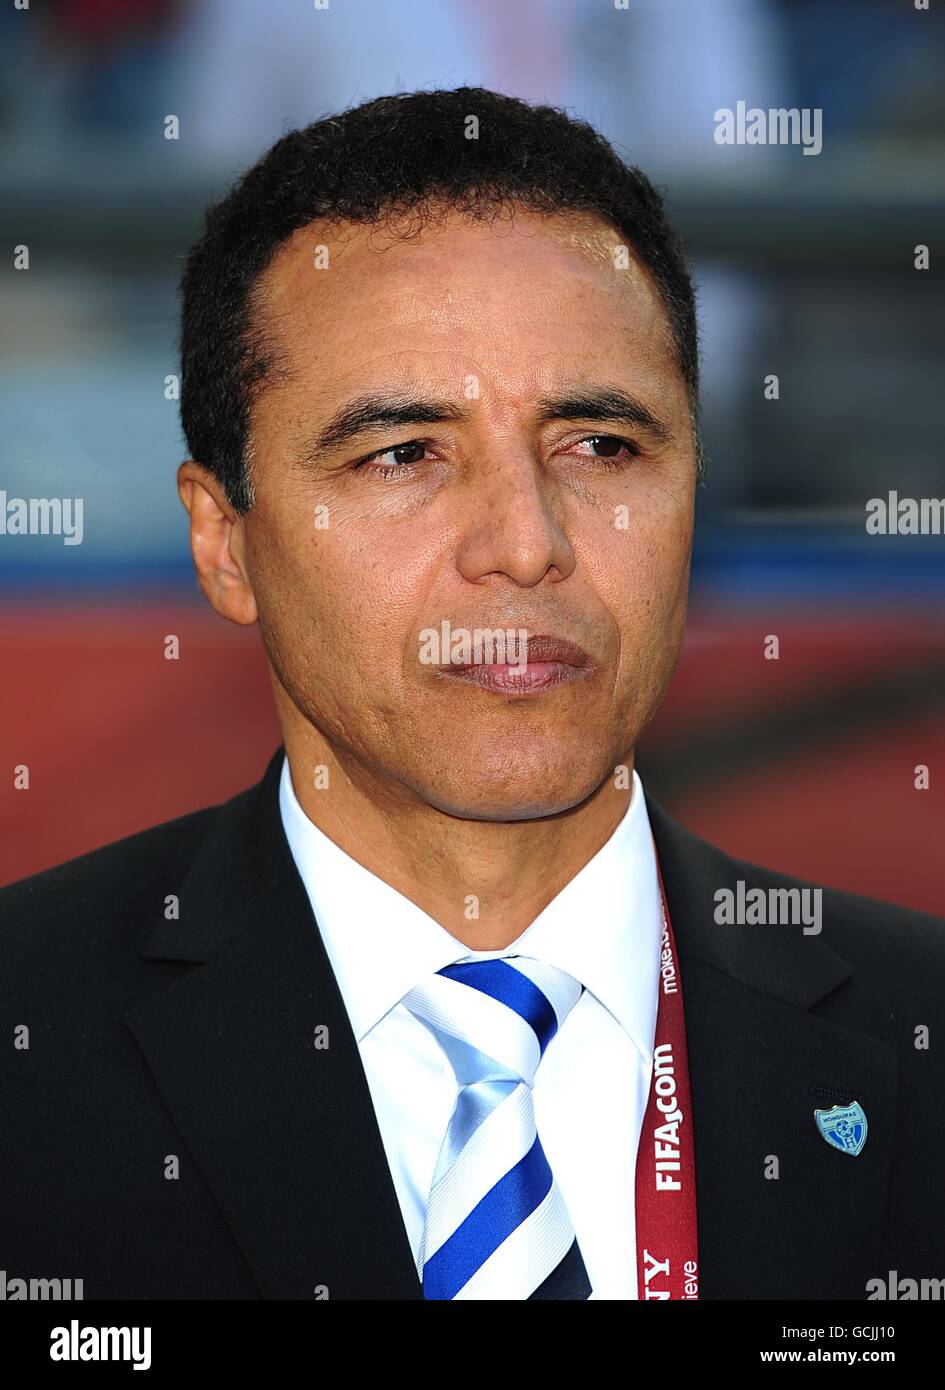 Honduras assistant coach Alexis Mendoza on the touchline in the absence of their head coach Reinaldo Rueda who recieved a toucline ban in a previous match. Stock Photo